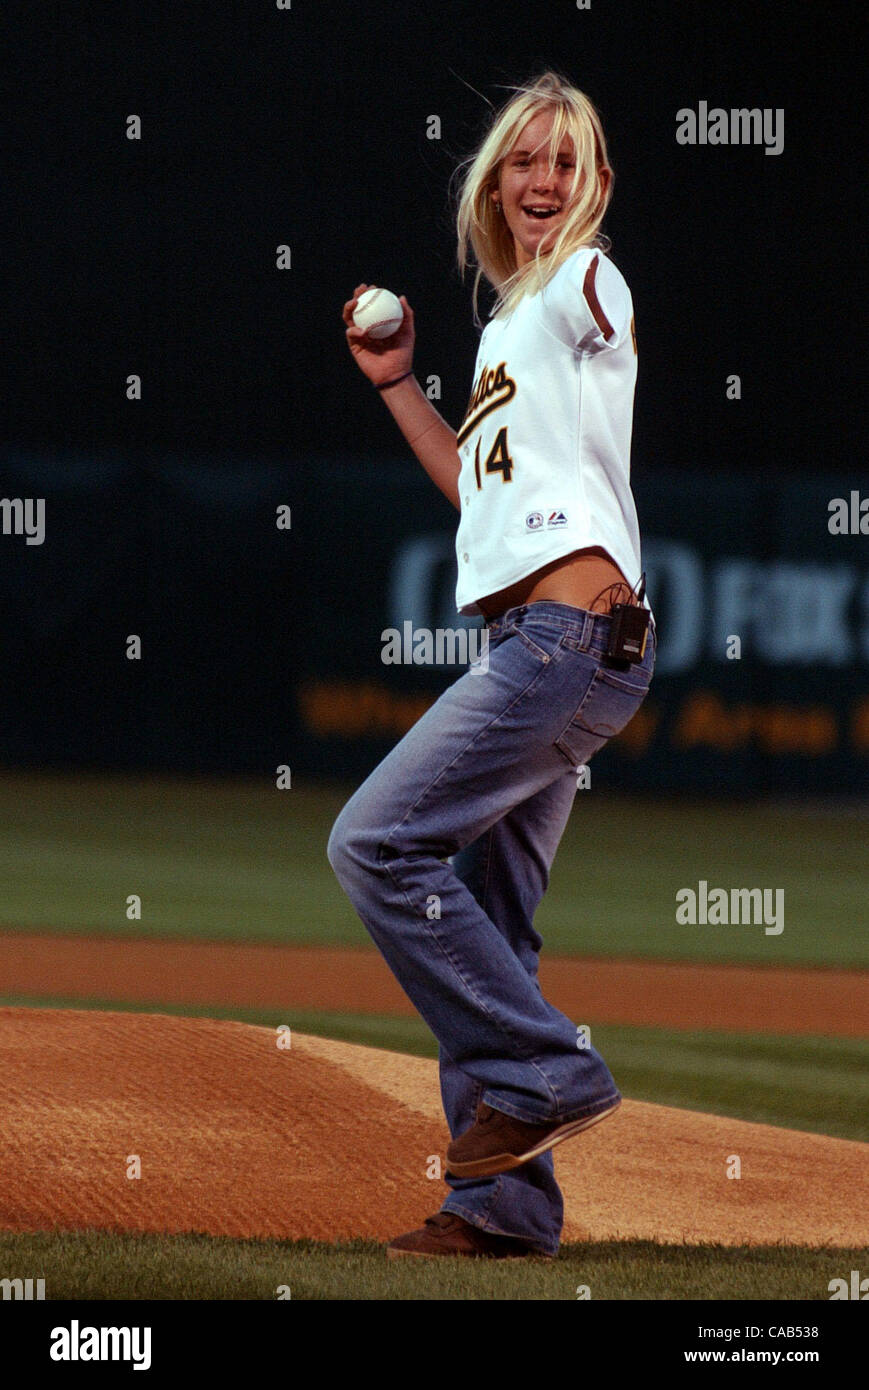 Bethany Hamilton, age 14, throws out the first pitch of ...